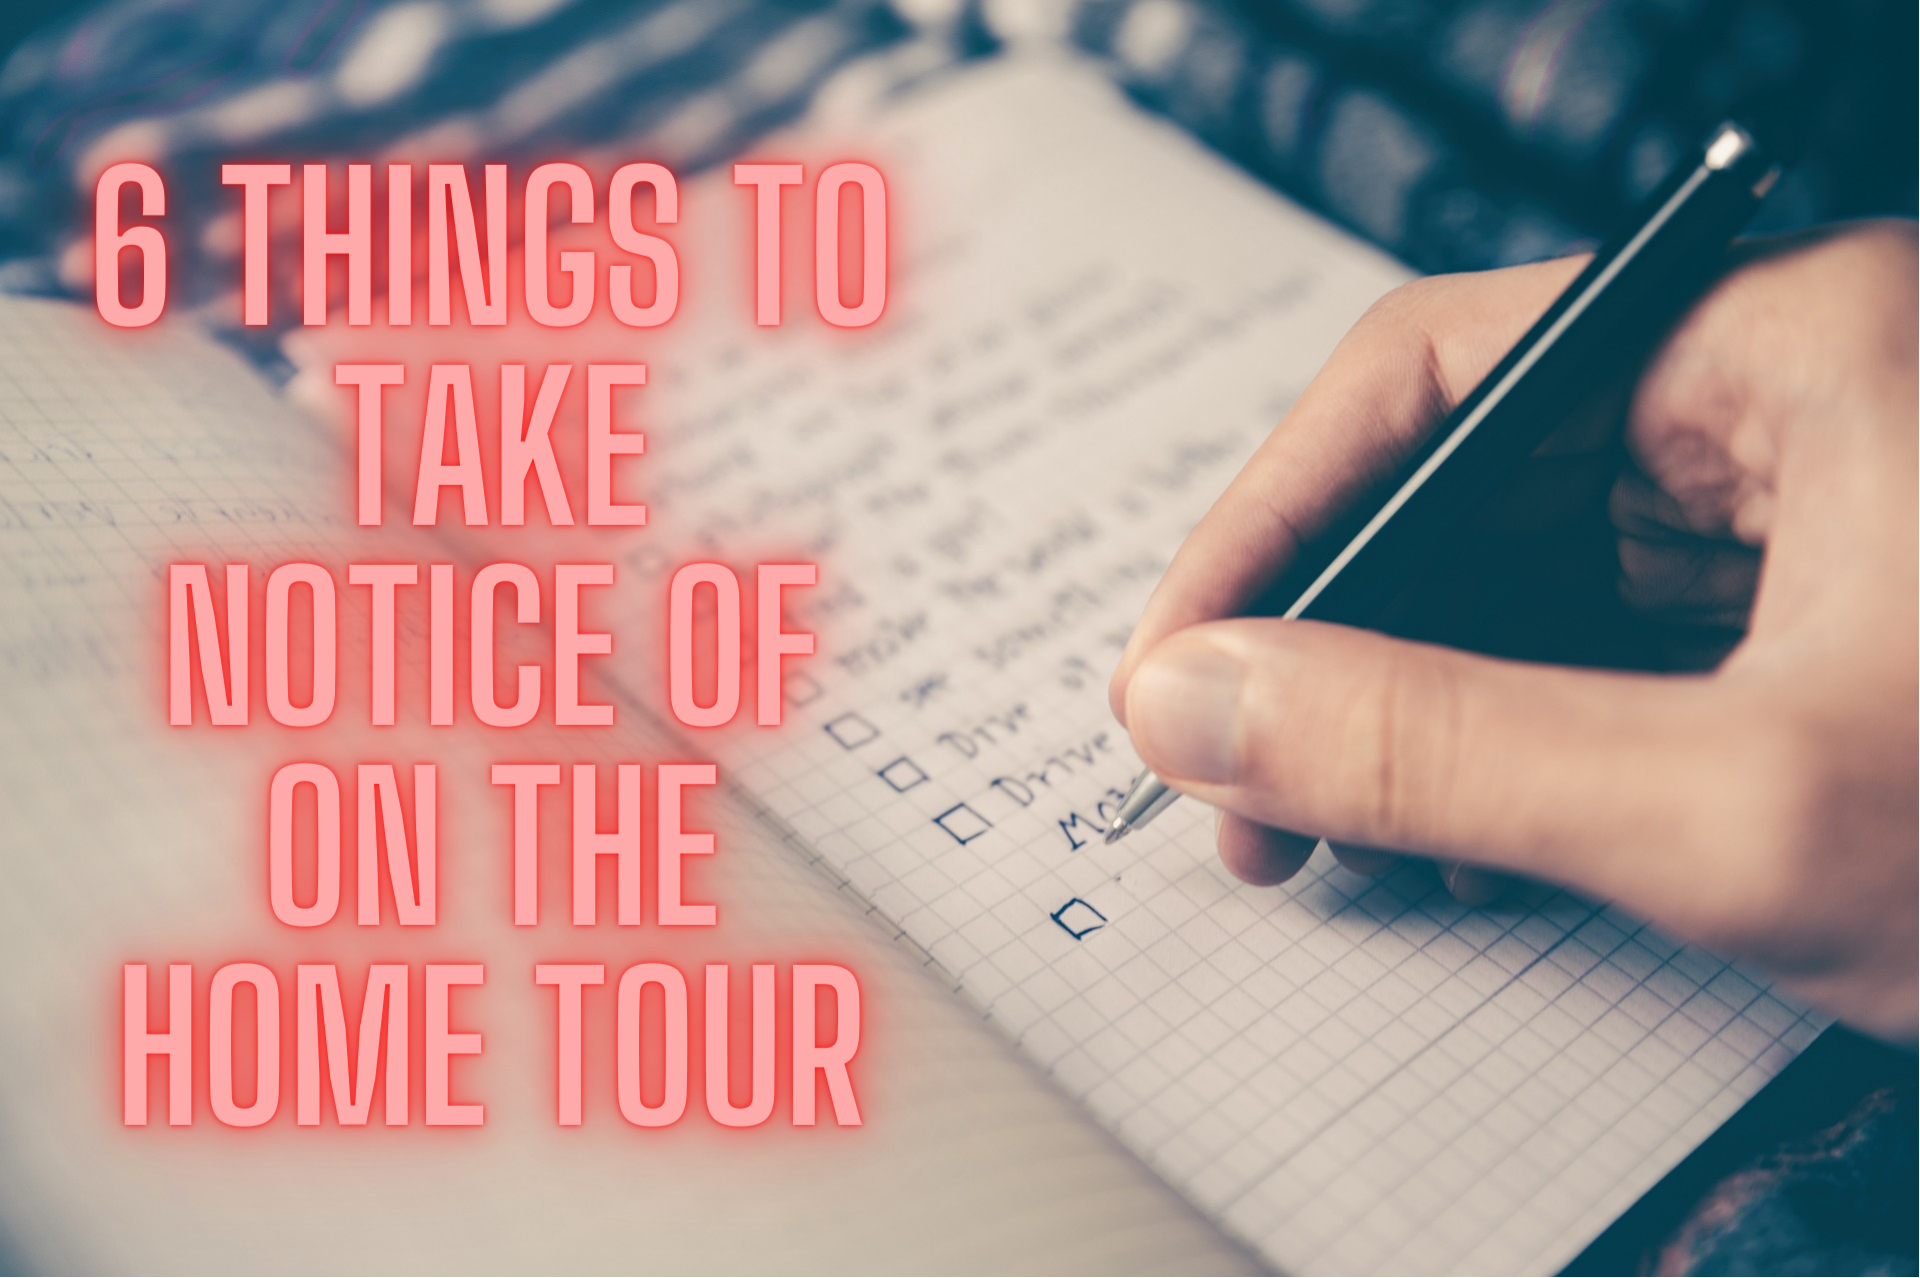 6_Things_to_Take_Notice_of_on_the_Home_Tour.png